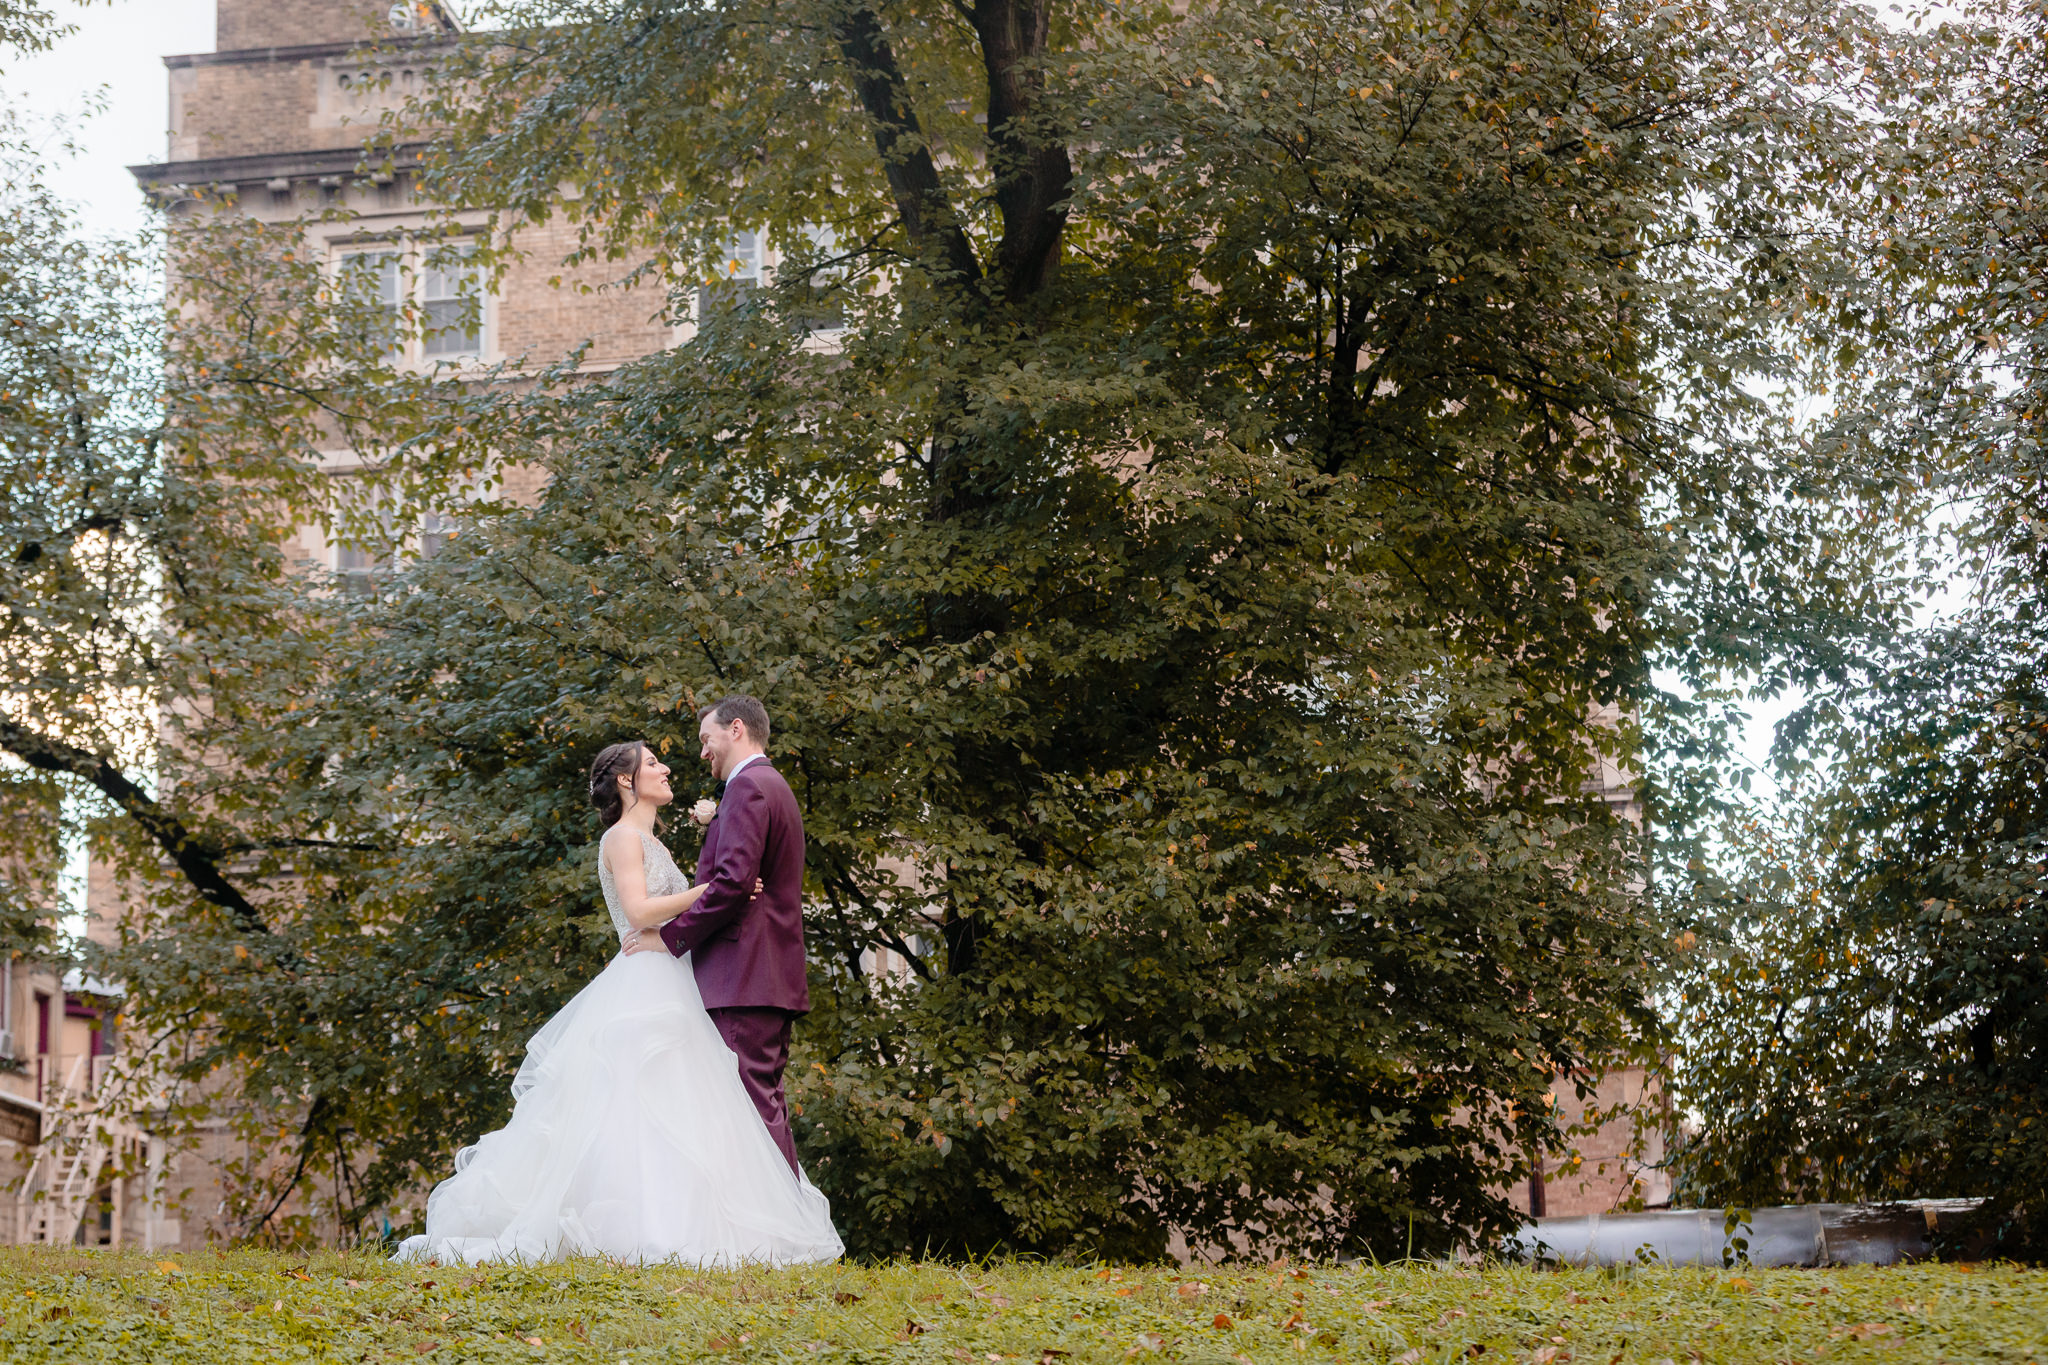 Bride & groom dance on a hilltop at Allegheny Commons Park in Pittsburgh